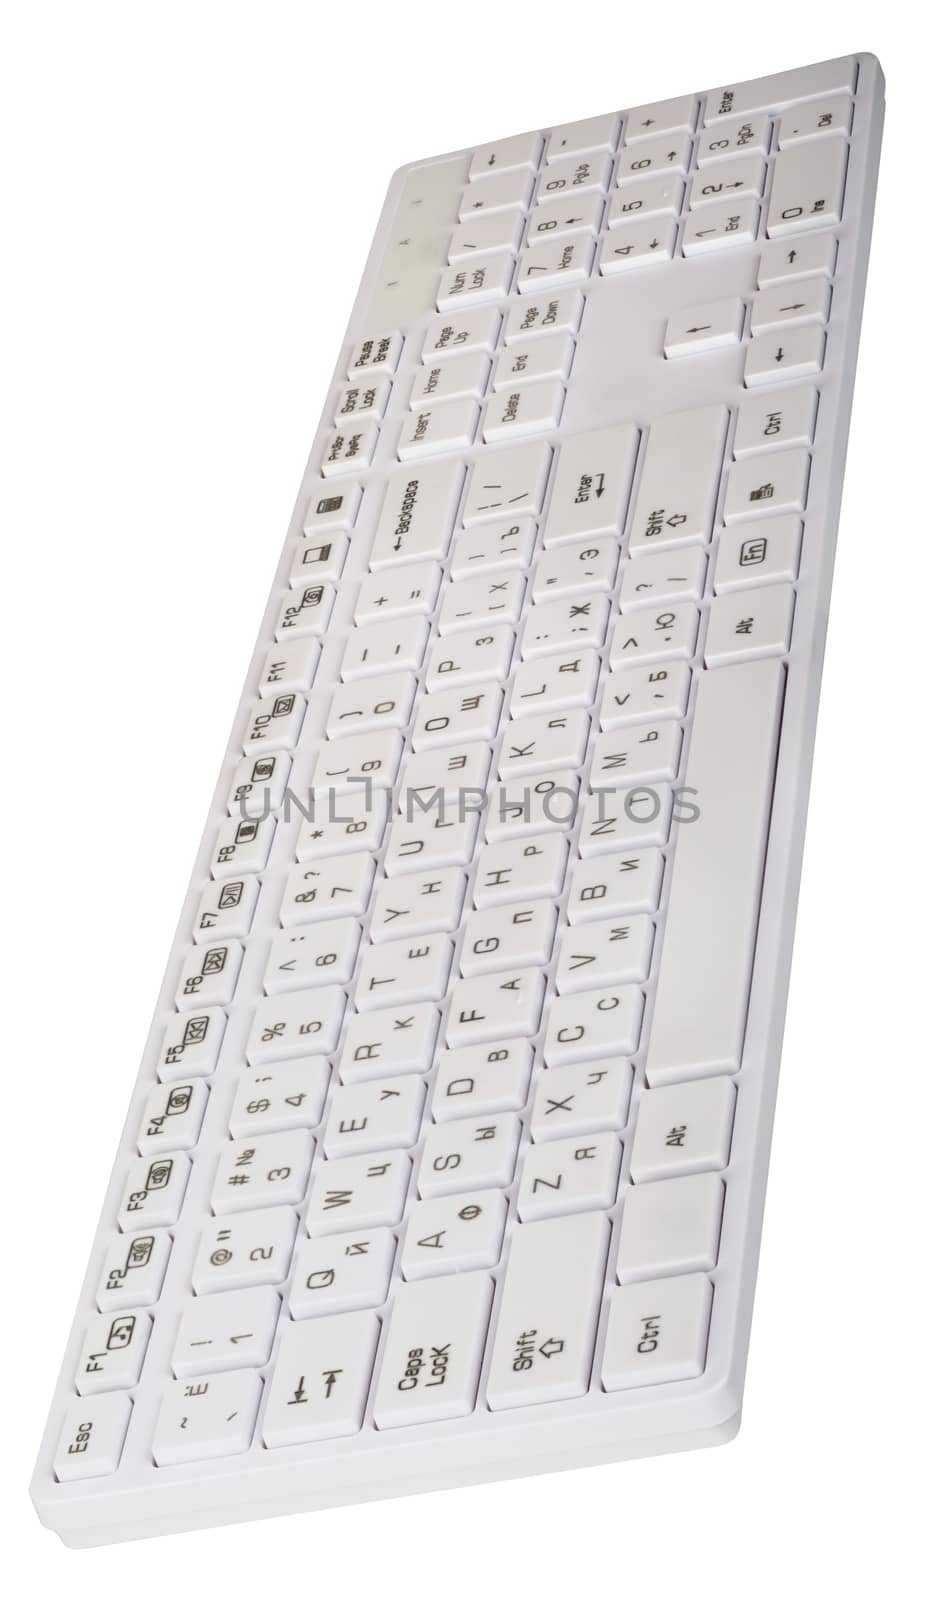 White computer keyboard on isolated white background, side view